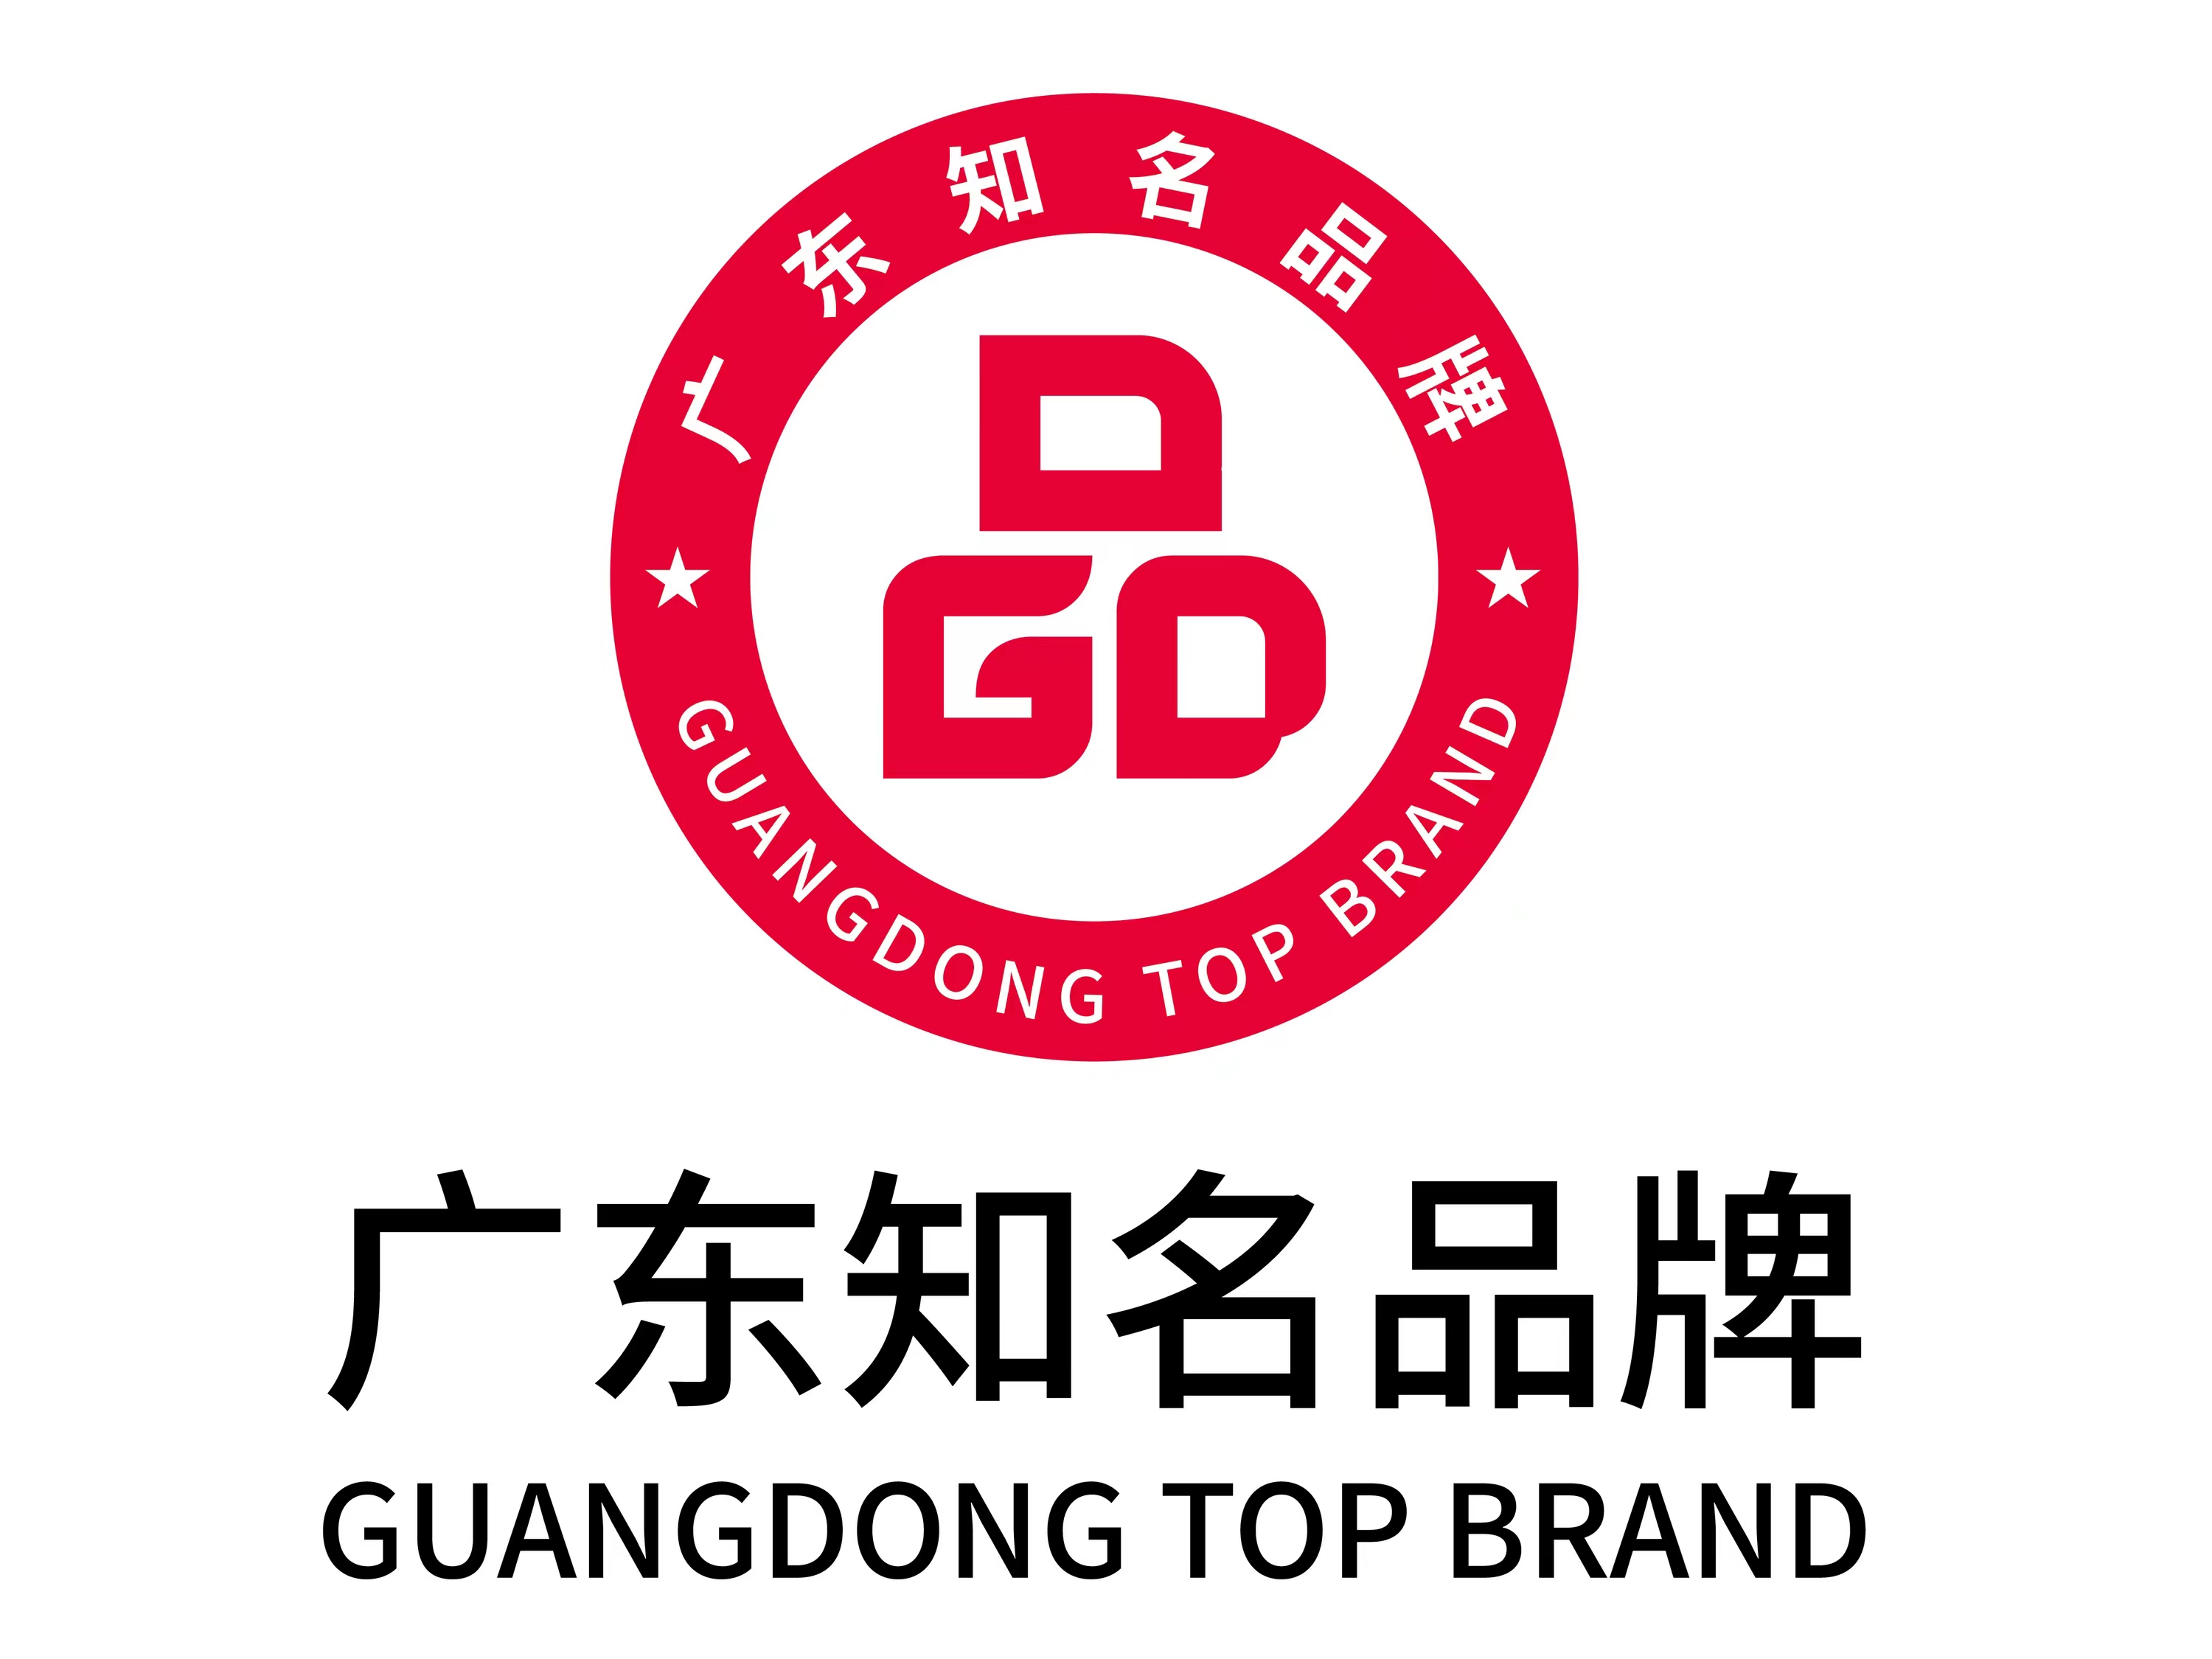 Guangdong famous brand